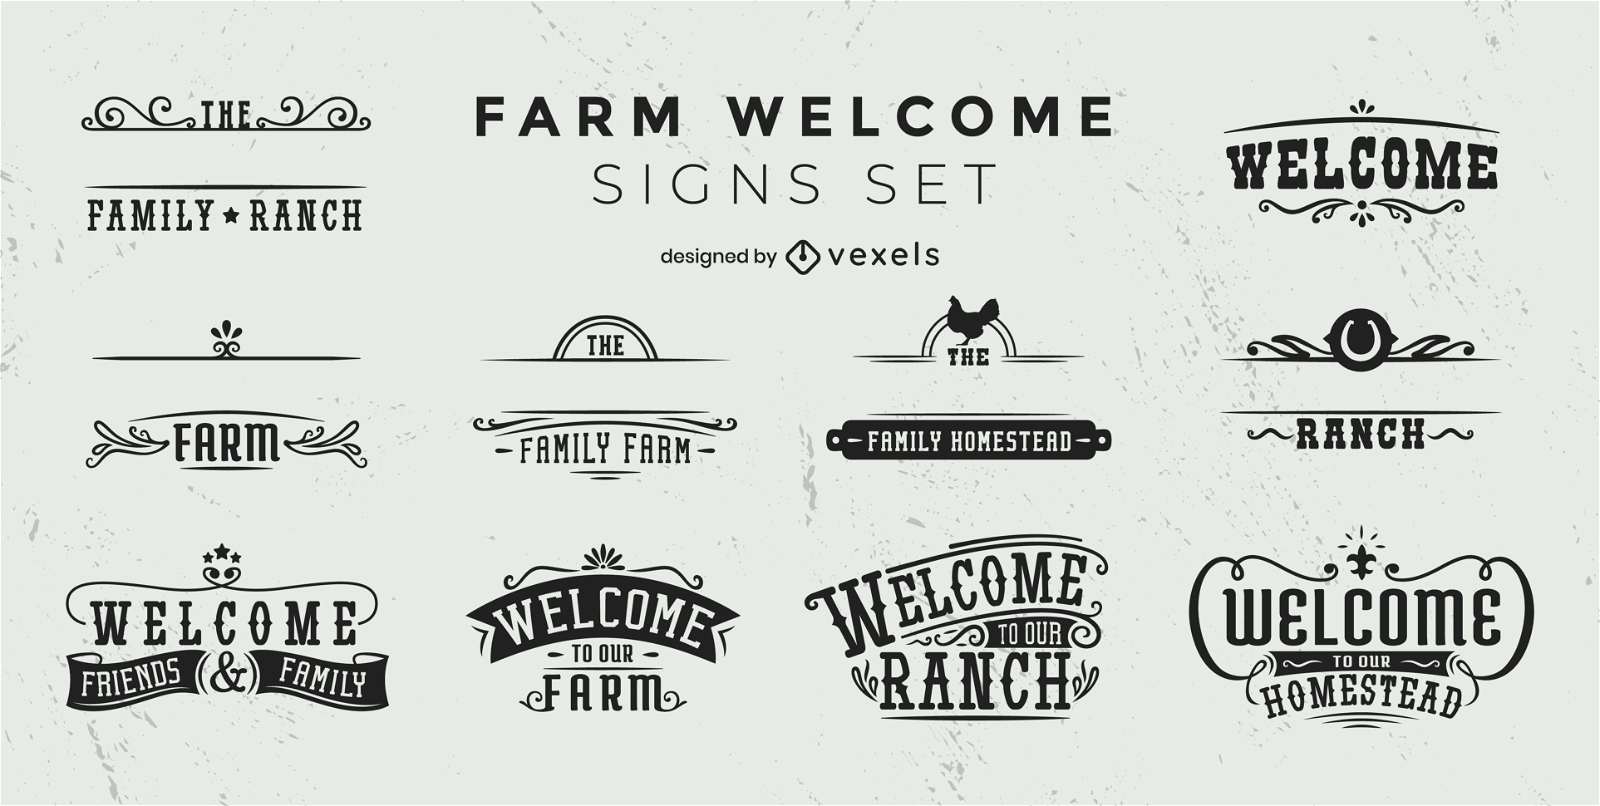 Farm ranch welcome signs set